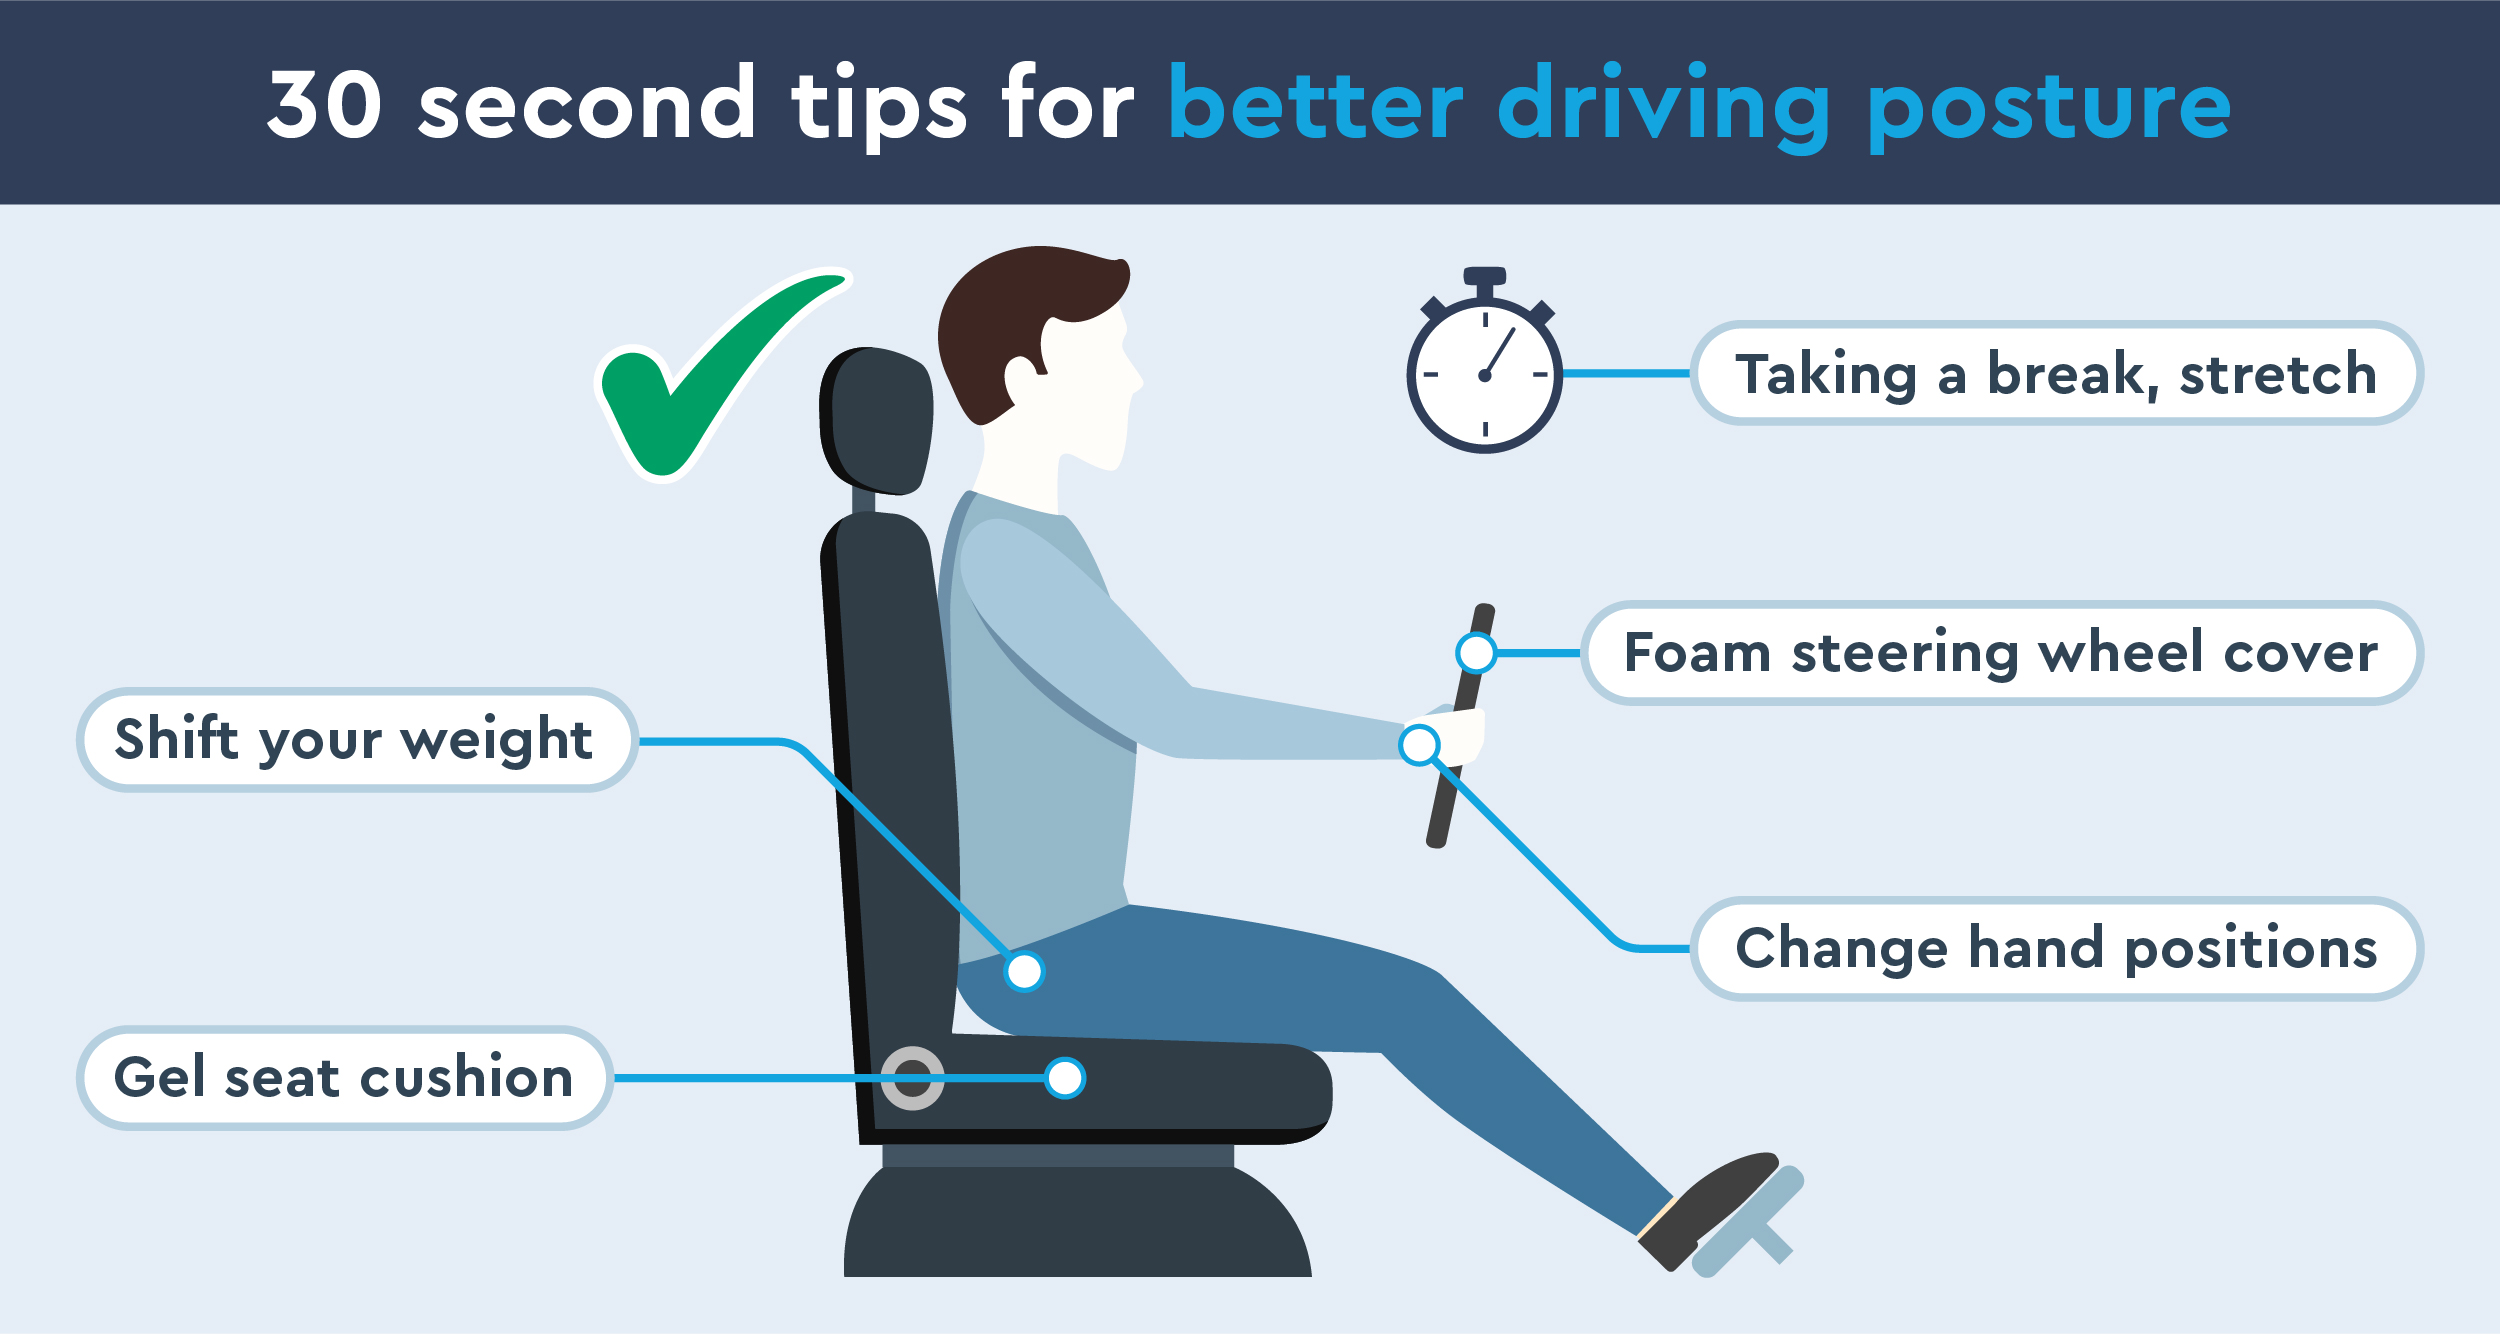 5 30-second tips for better driving posture